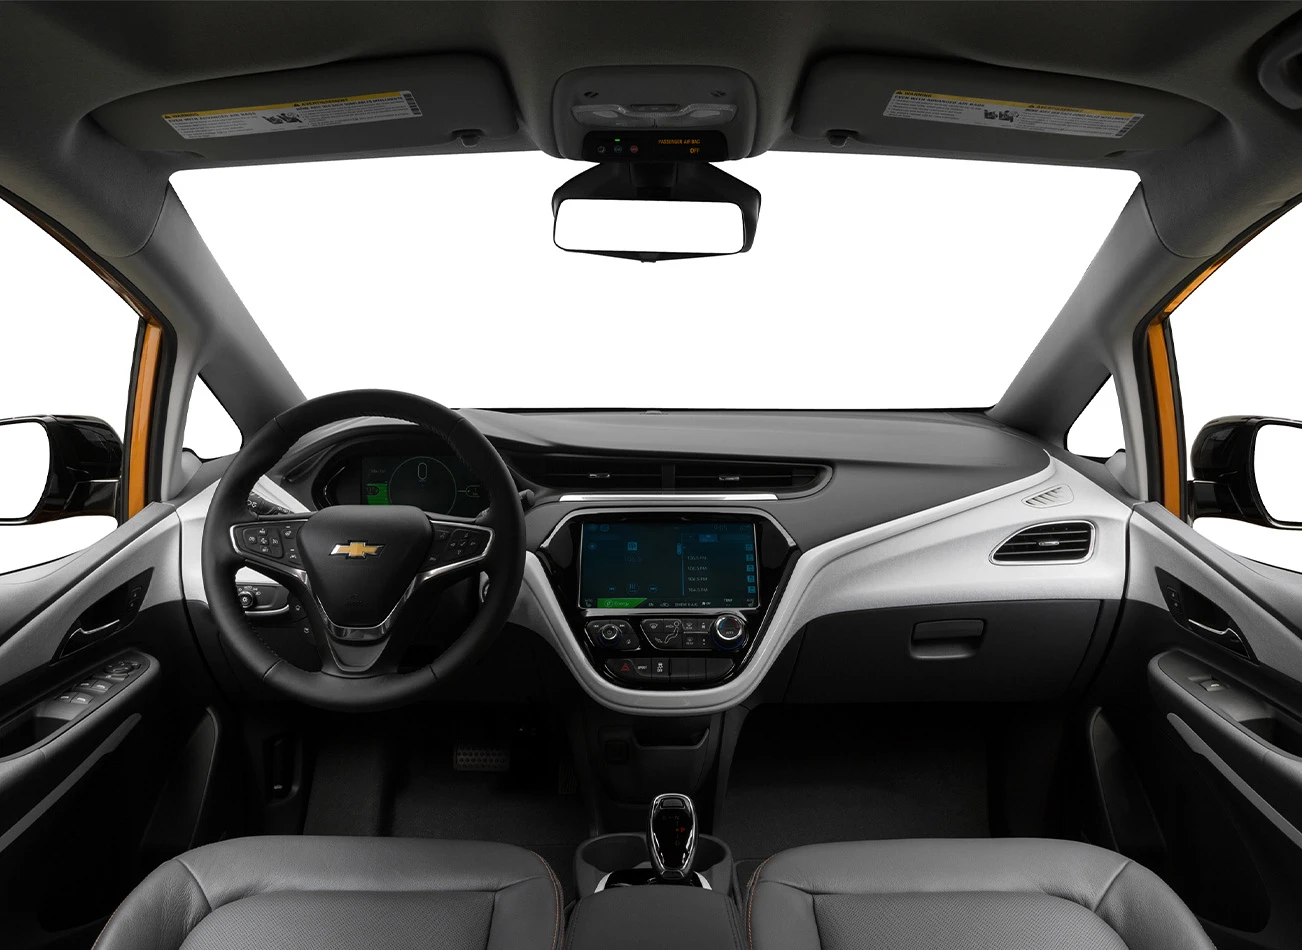 2018 Chevrolet Bolt EV: Drivers seat view of vehicles interior